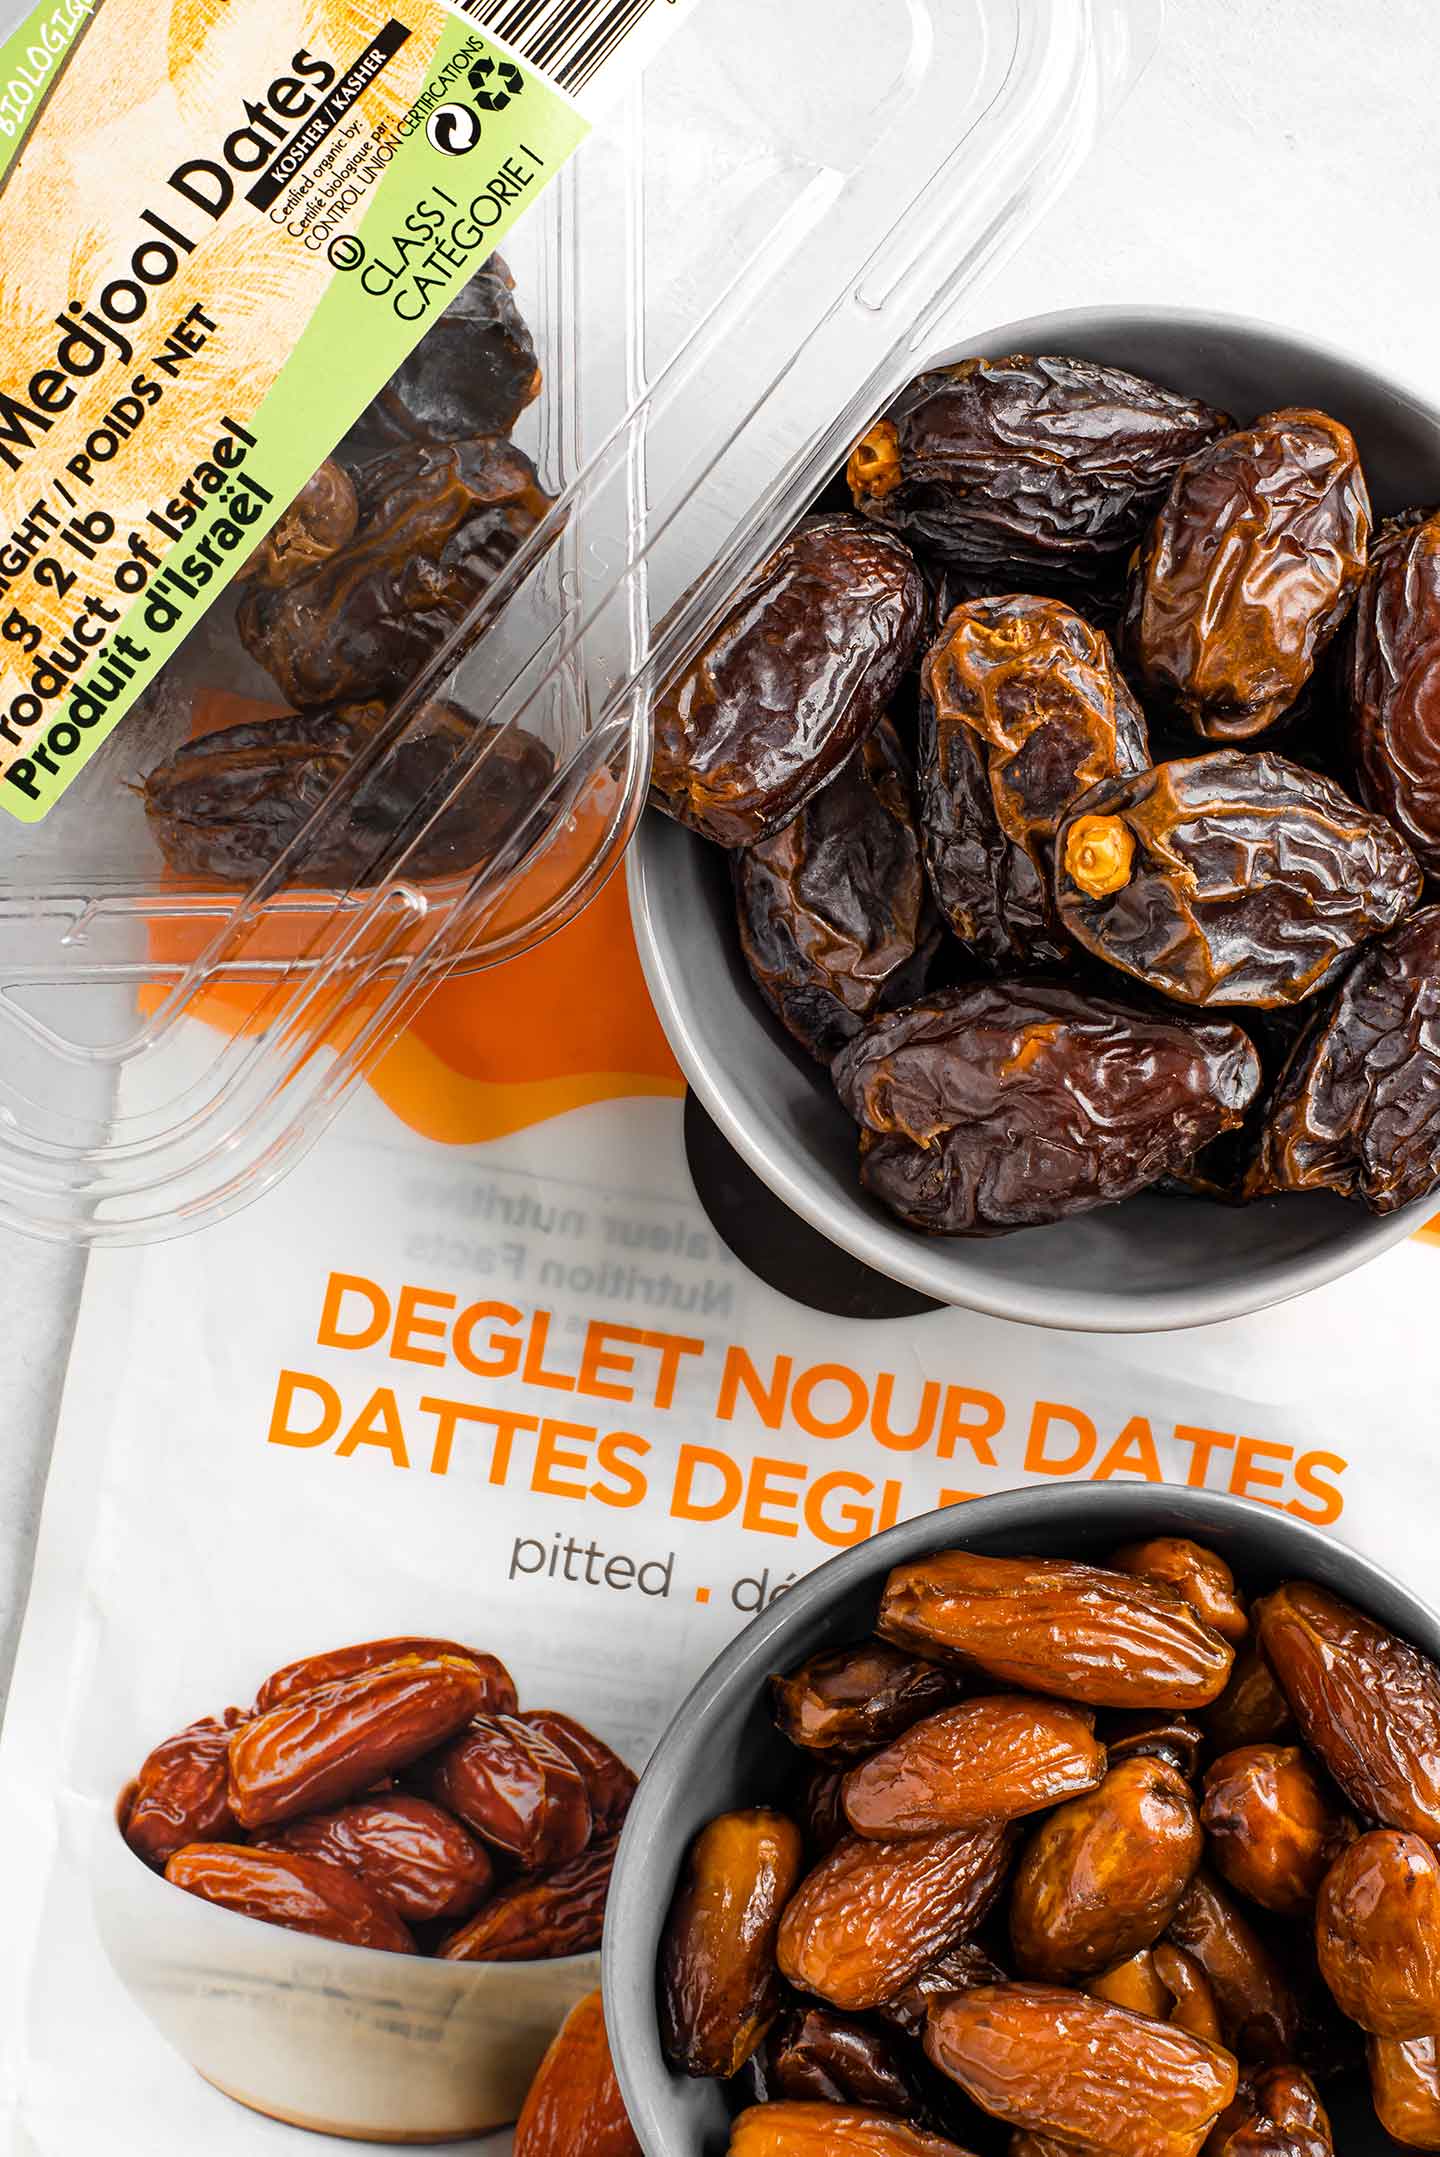 Top down view of large medjool dates and their packaging. Next to; smaller, lighter in colour, deglet nour dates and their packaging.